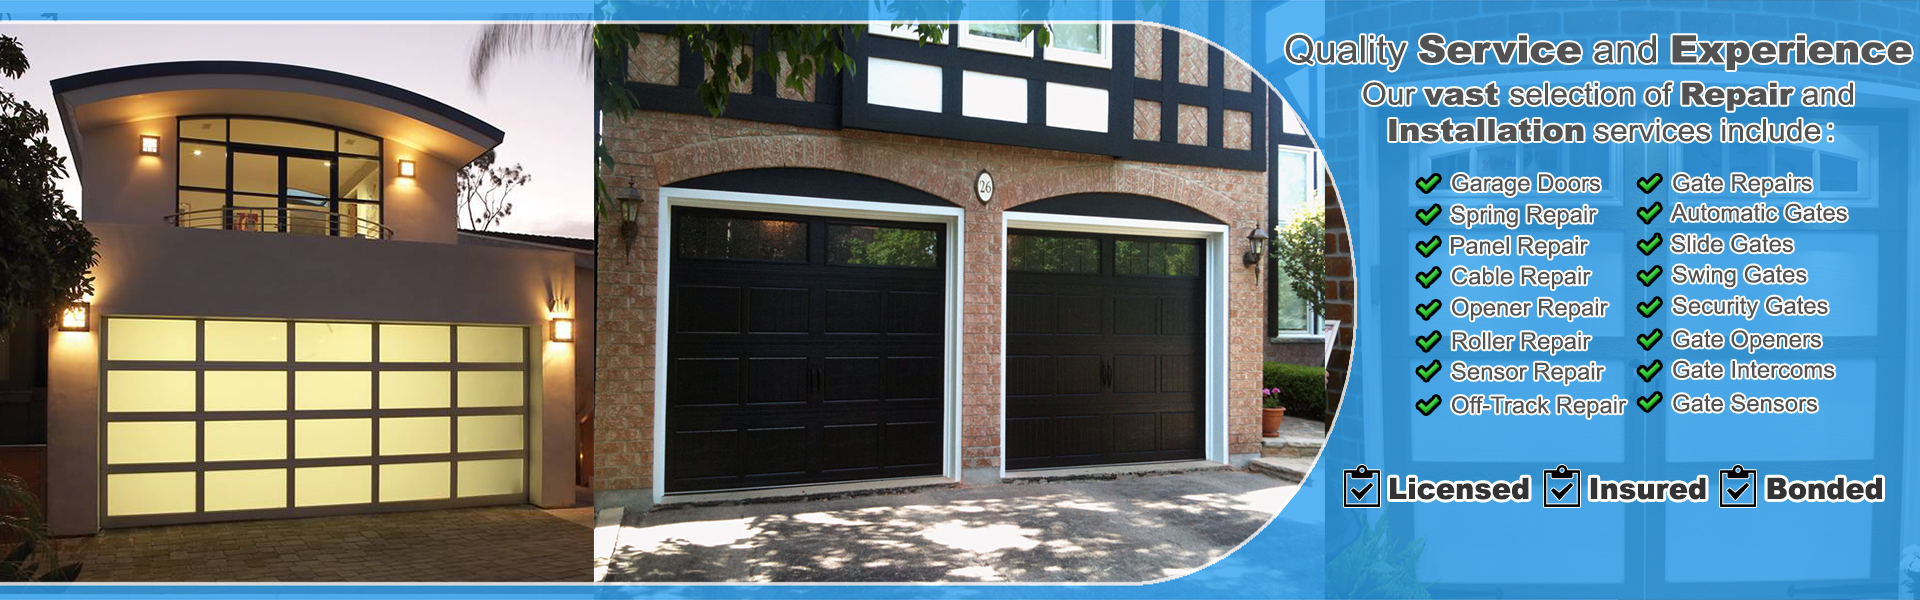 Garage Door Repair Canby OR Services